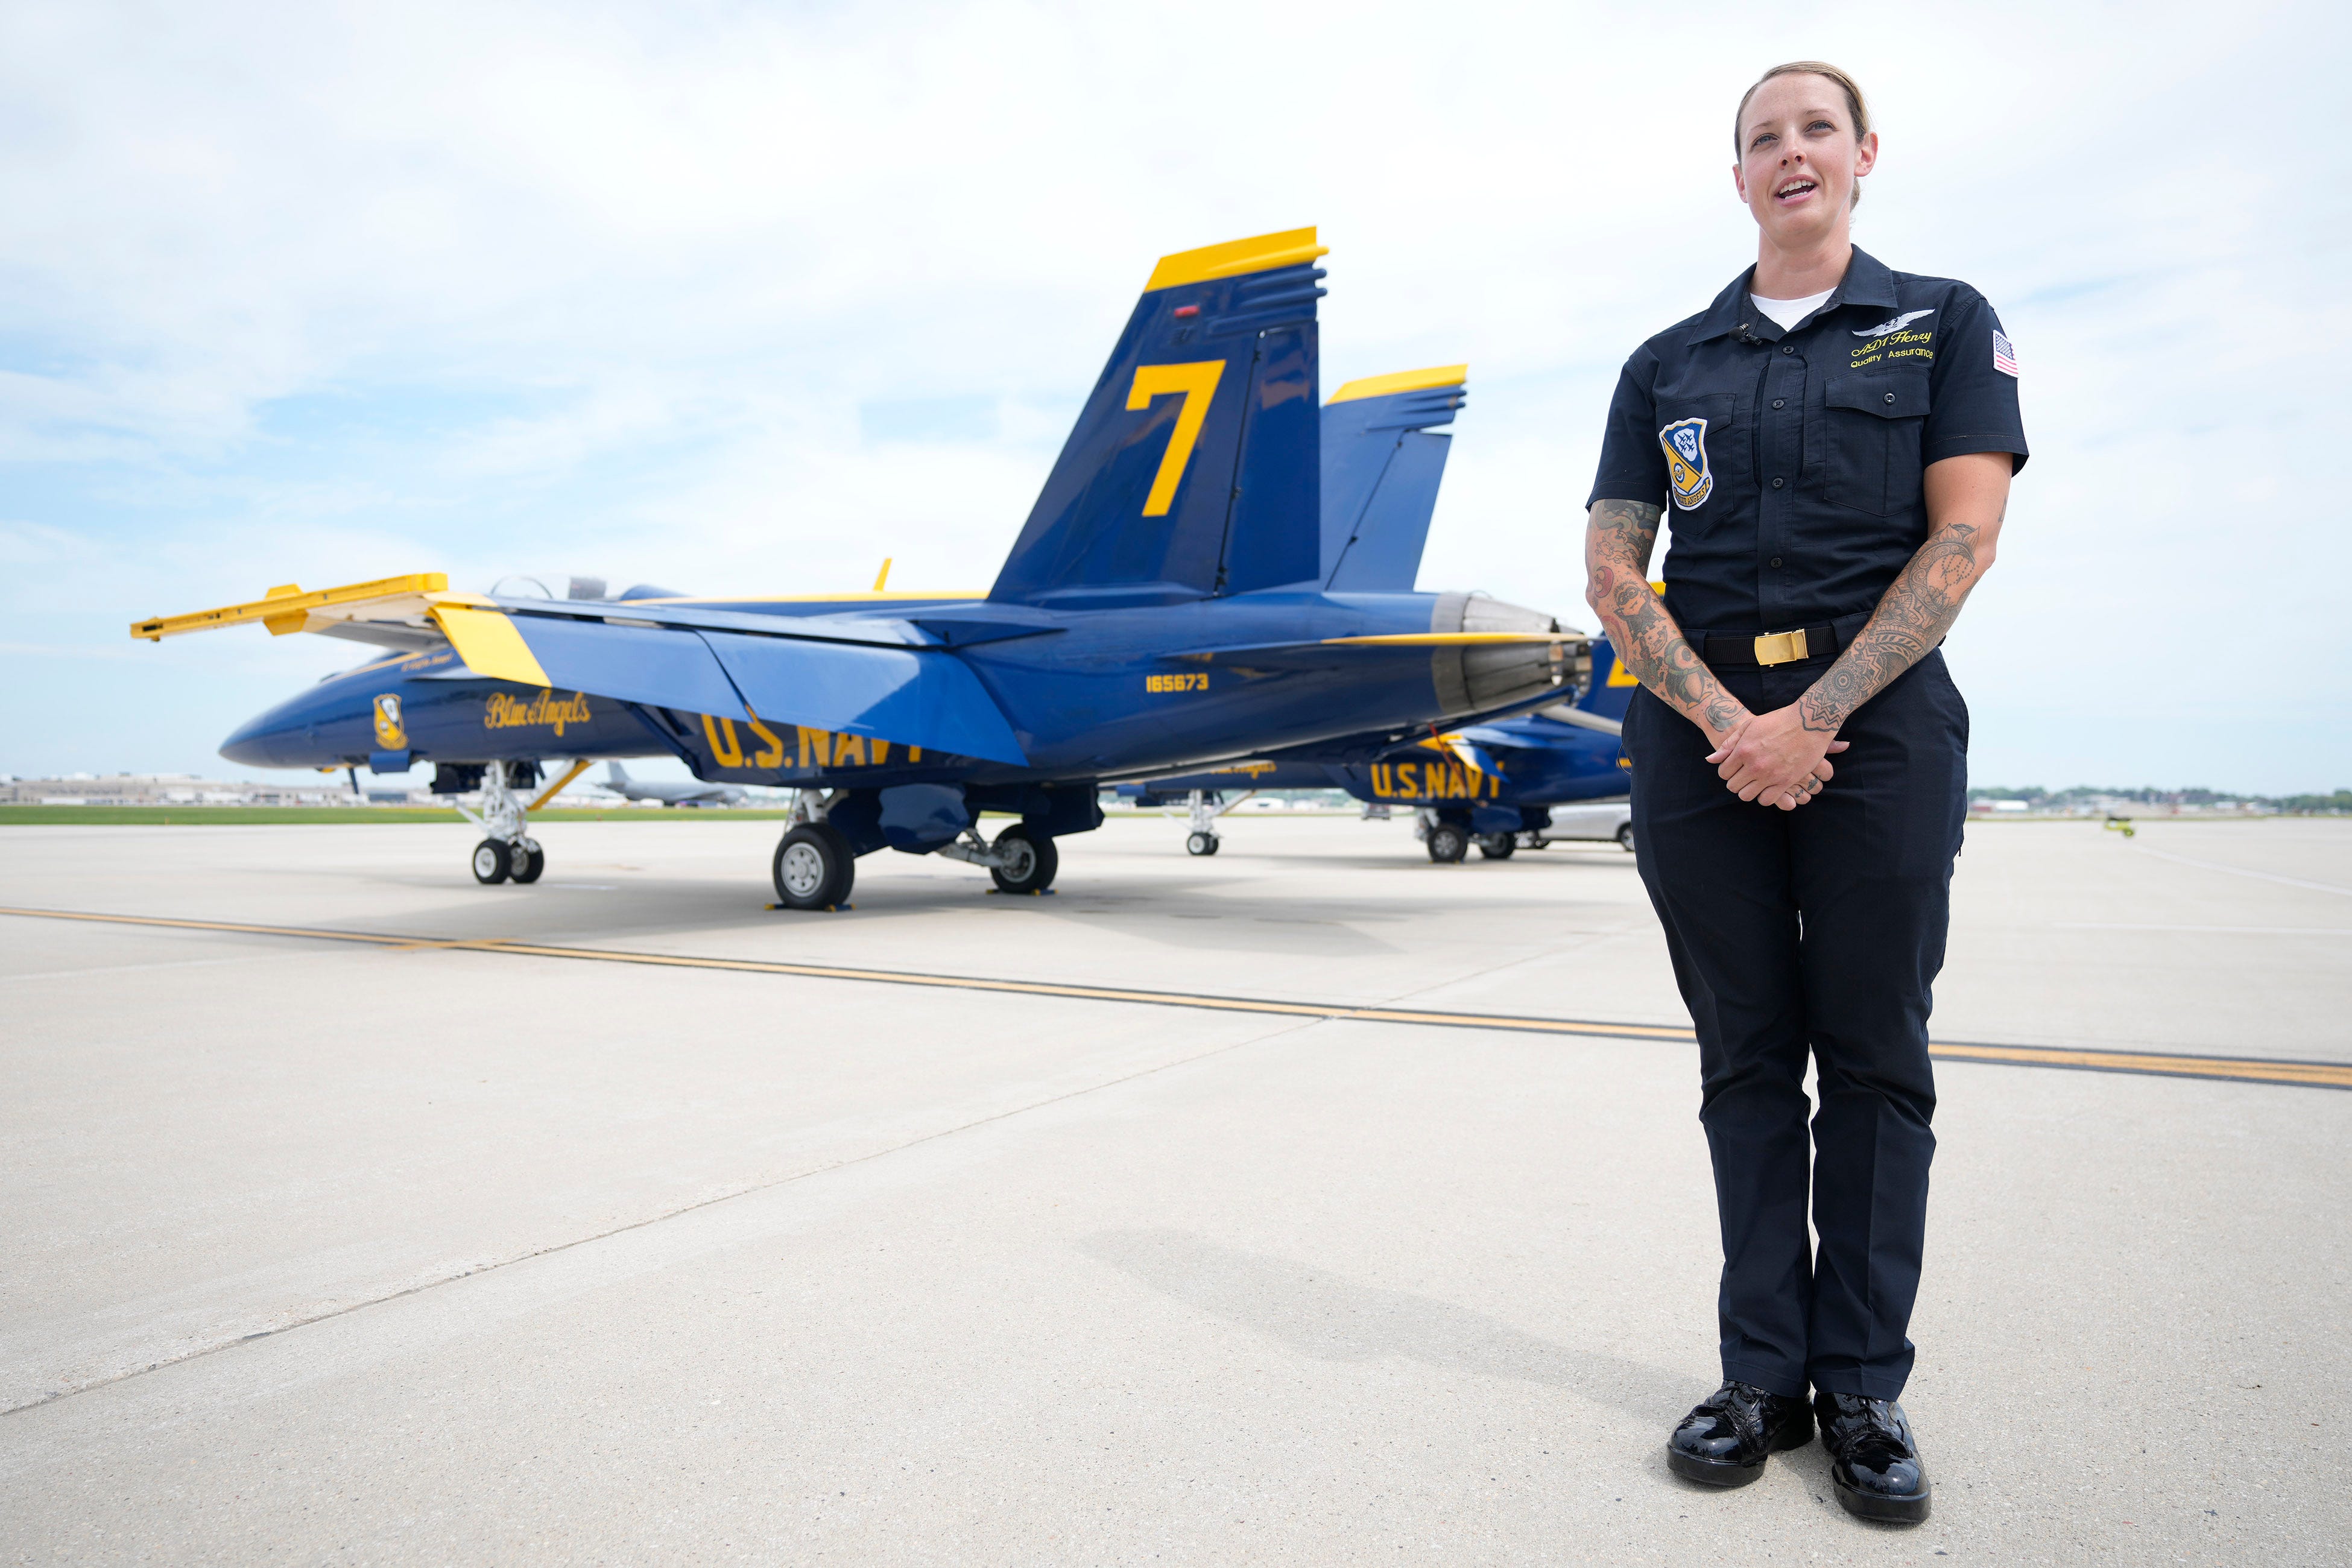 Blue Angels jets return for the Milwaukee Air & Water Show 2022